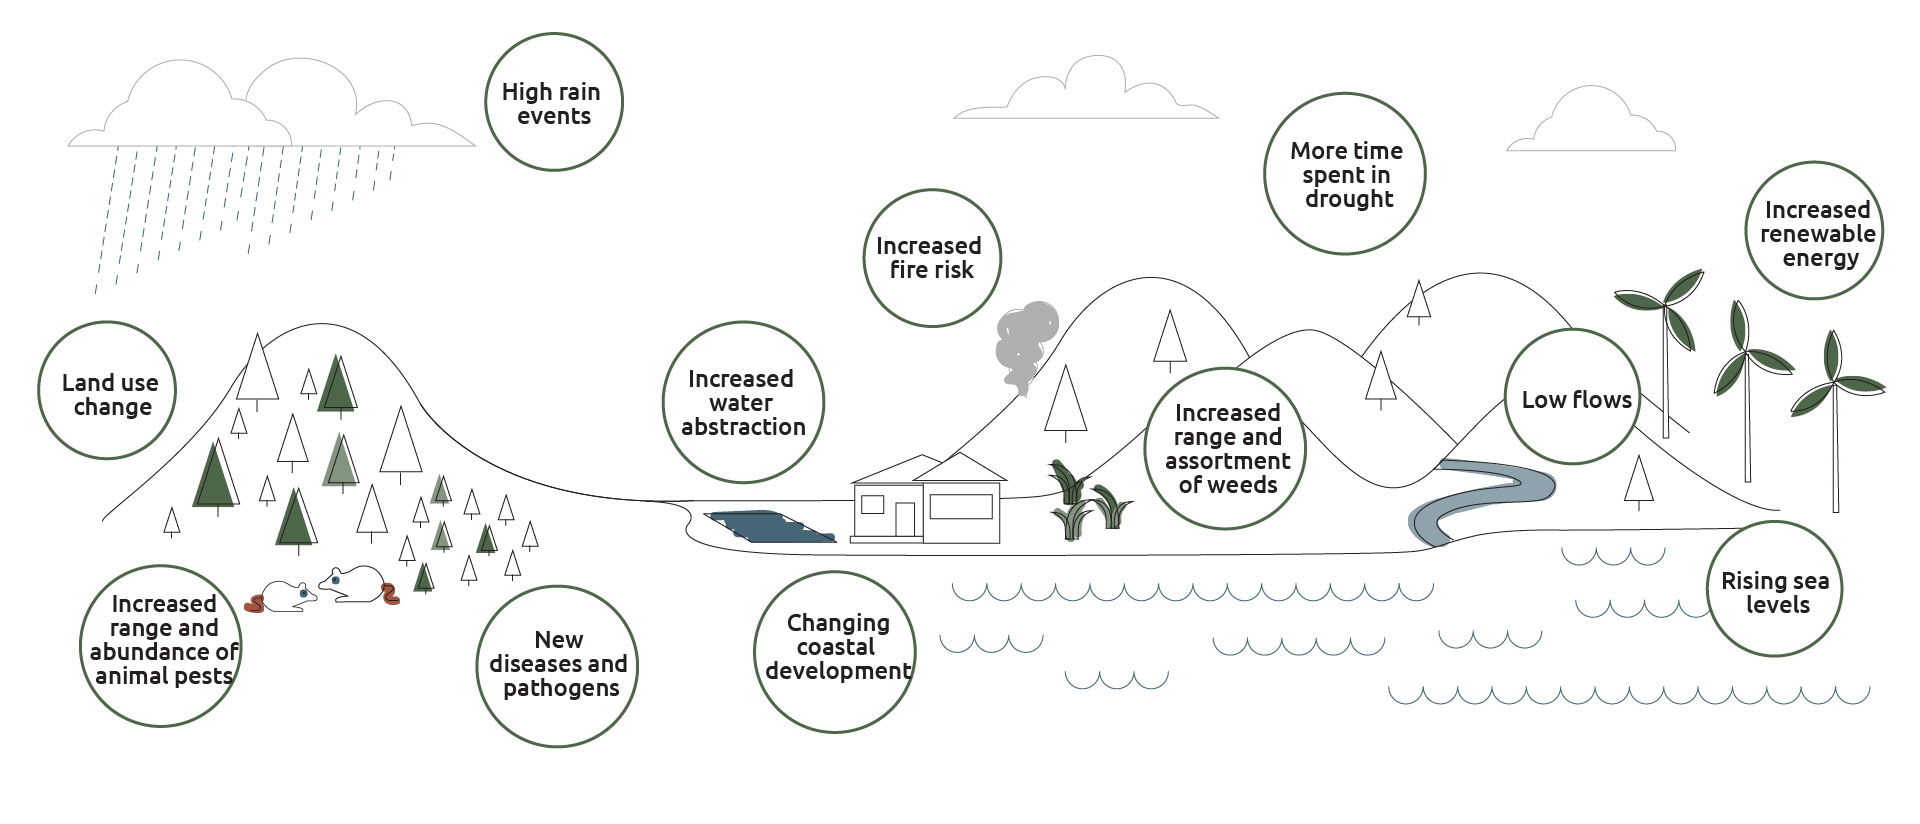 Infographic of the impacts of climate change on a landscape. There area a wide range of issues shown in bubbles across the landscape.